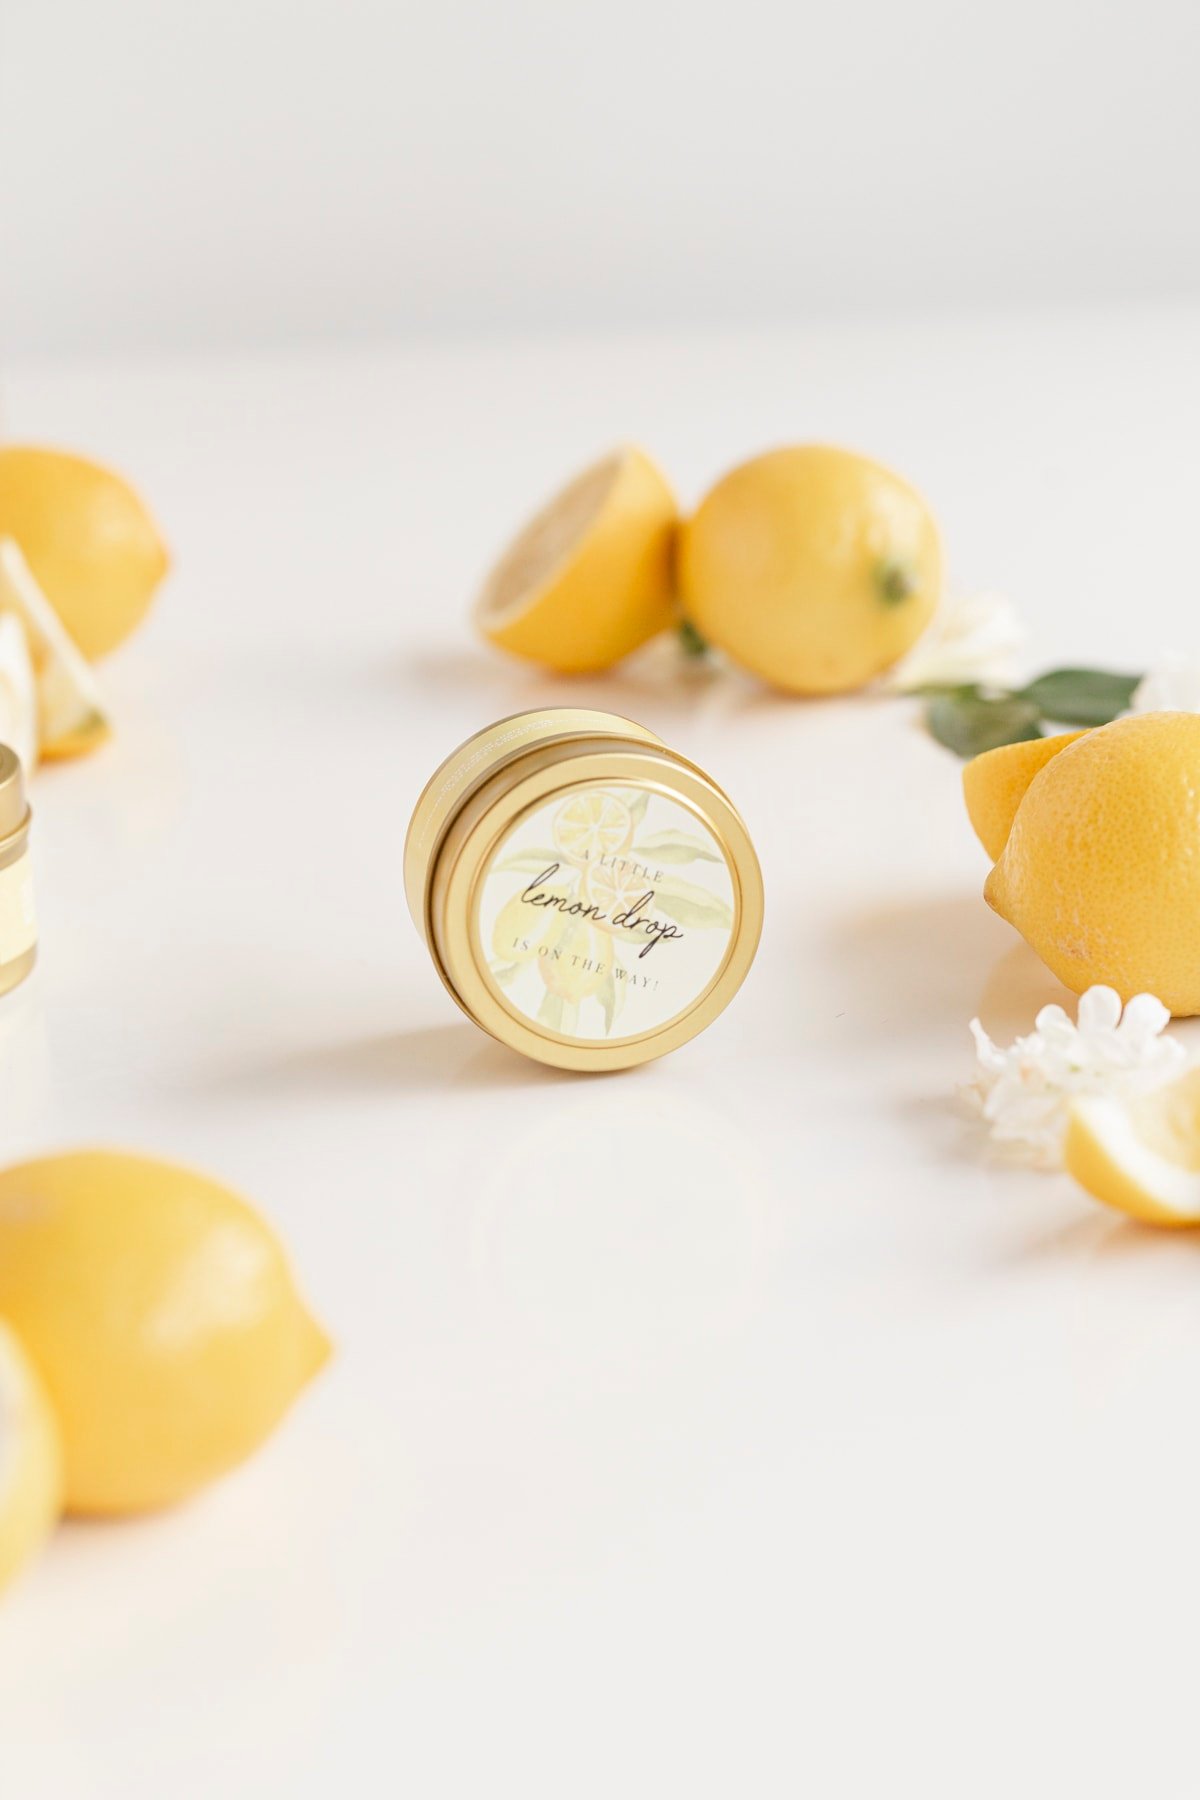 lemon themed baby shower favors candles with other lemons